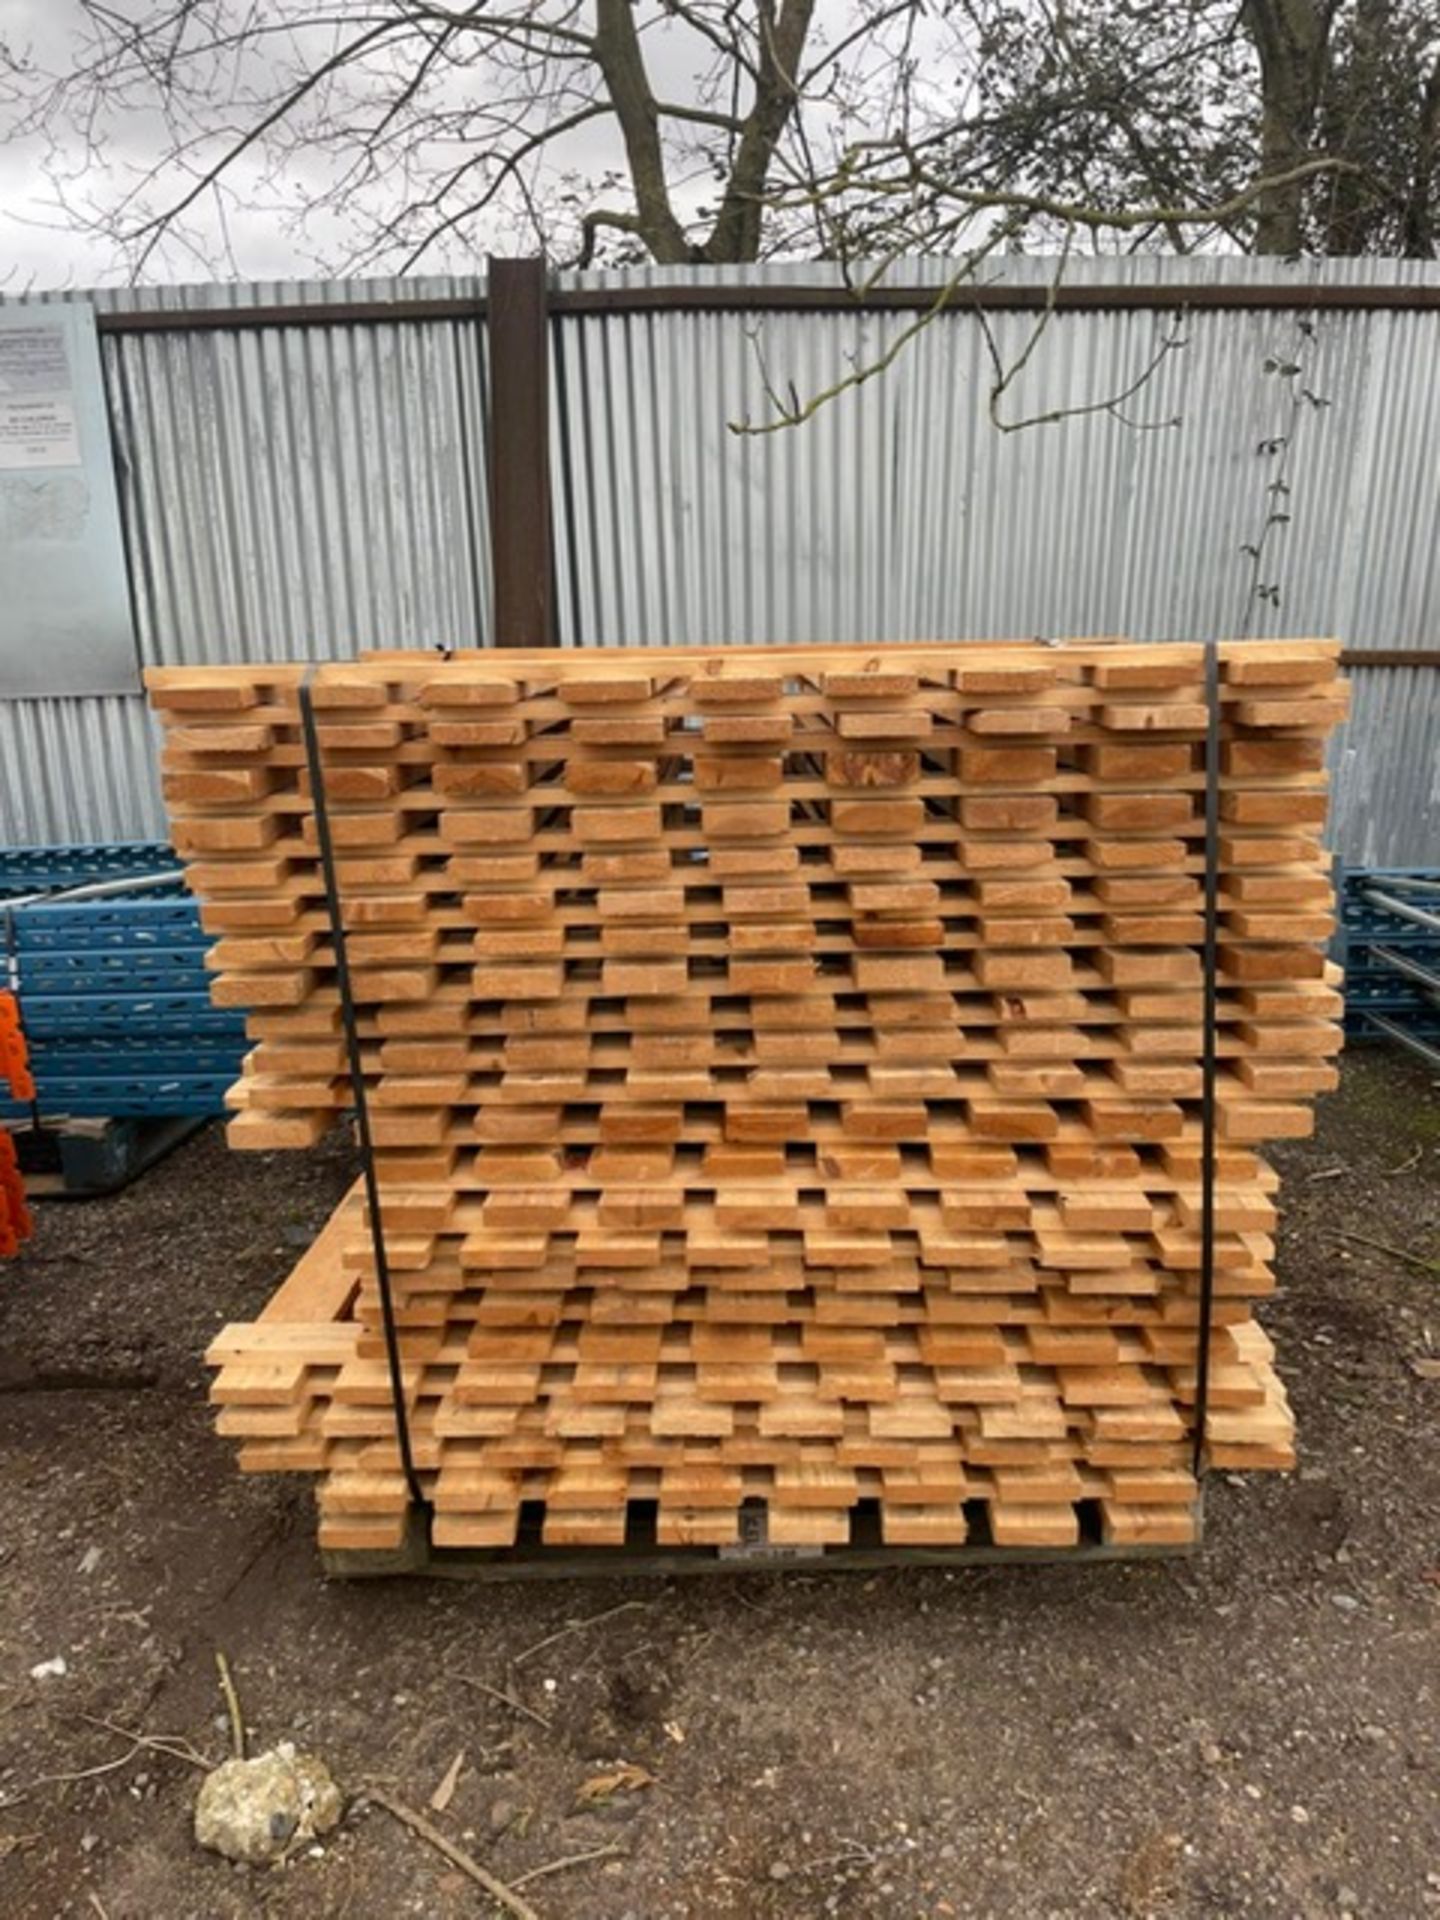 BUNDLE OF 4 BAYS OF PALLET RACKING WITH UPRIGHTS, BEAMS AND BOARDS - Image 5 of 7